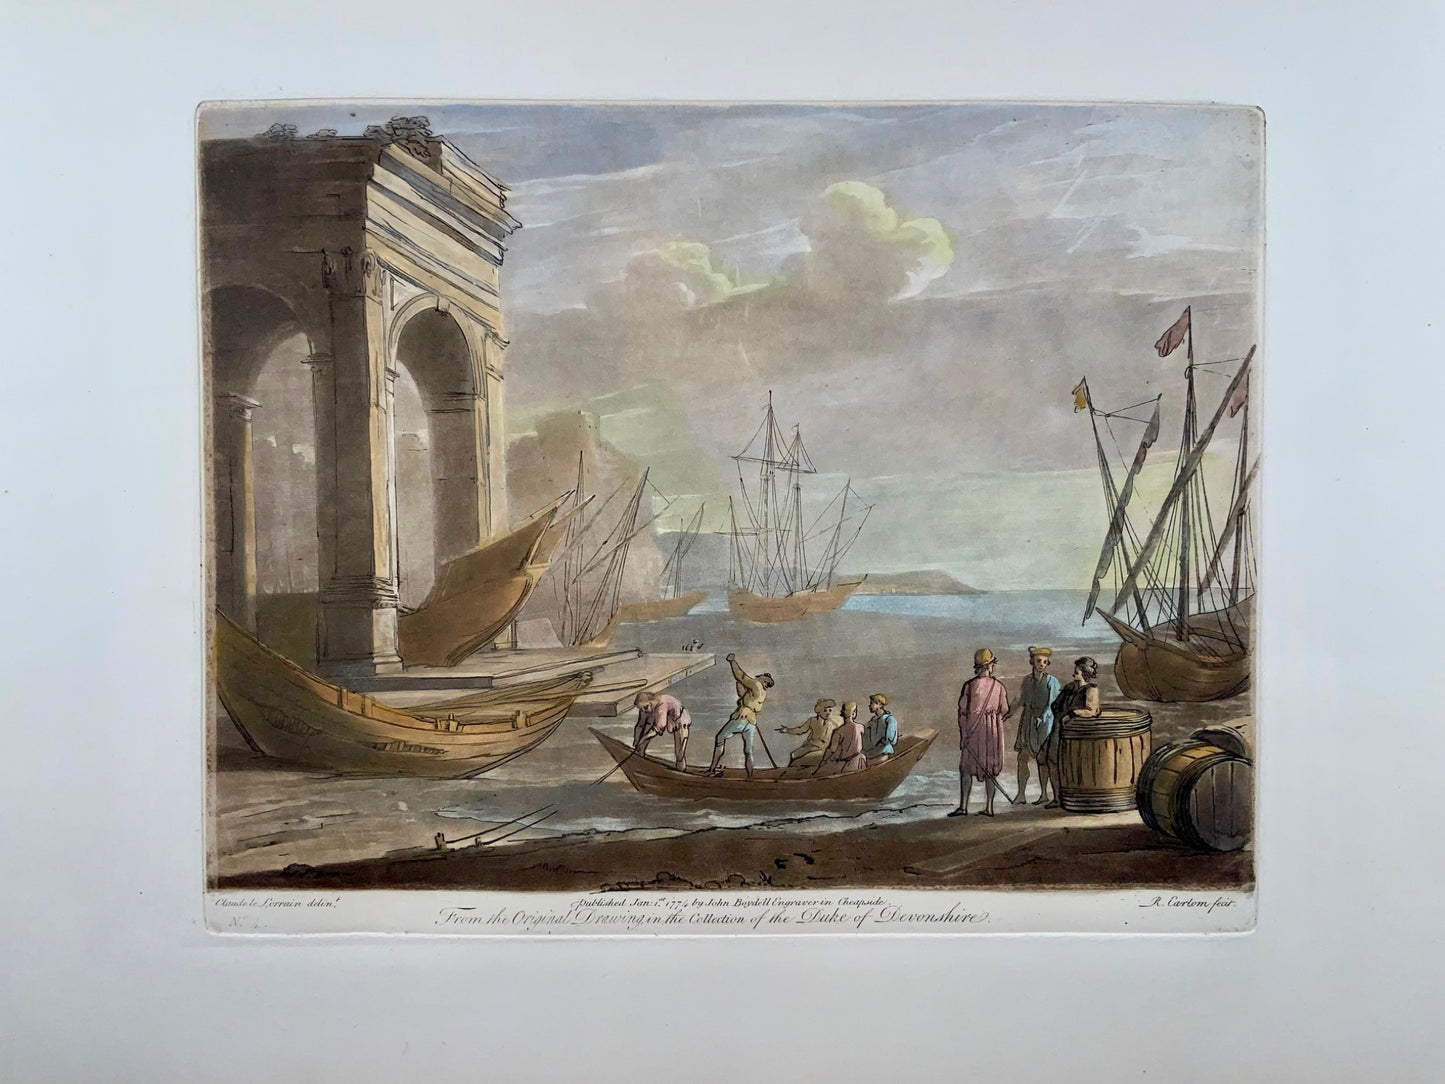 1774 Richard Earlom after CLAUDE LORRAIN - Harbour view with Ships - Large paper - Classical art